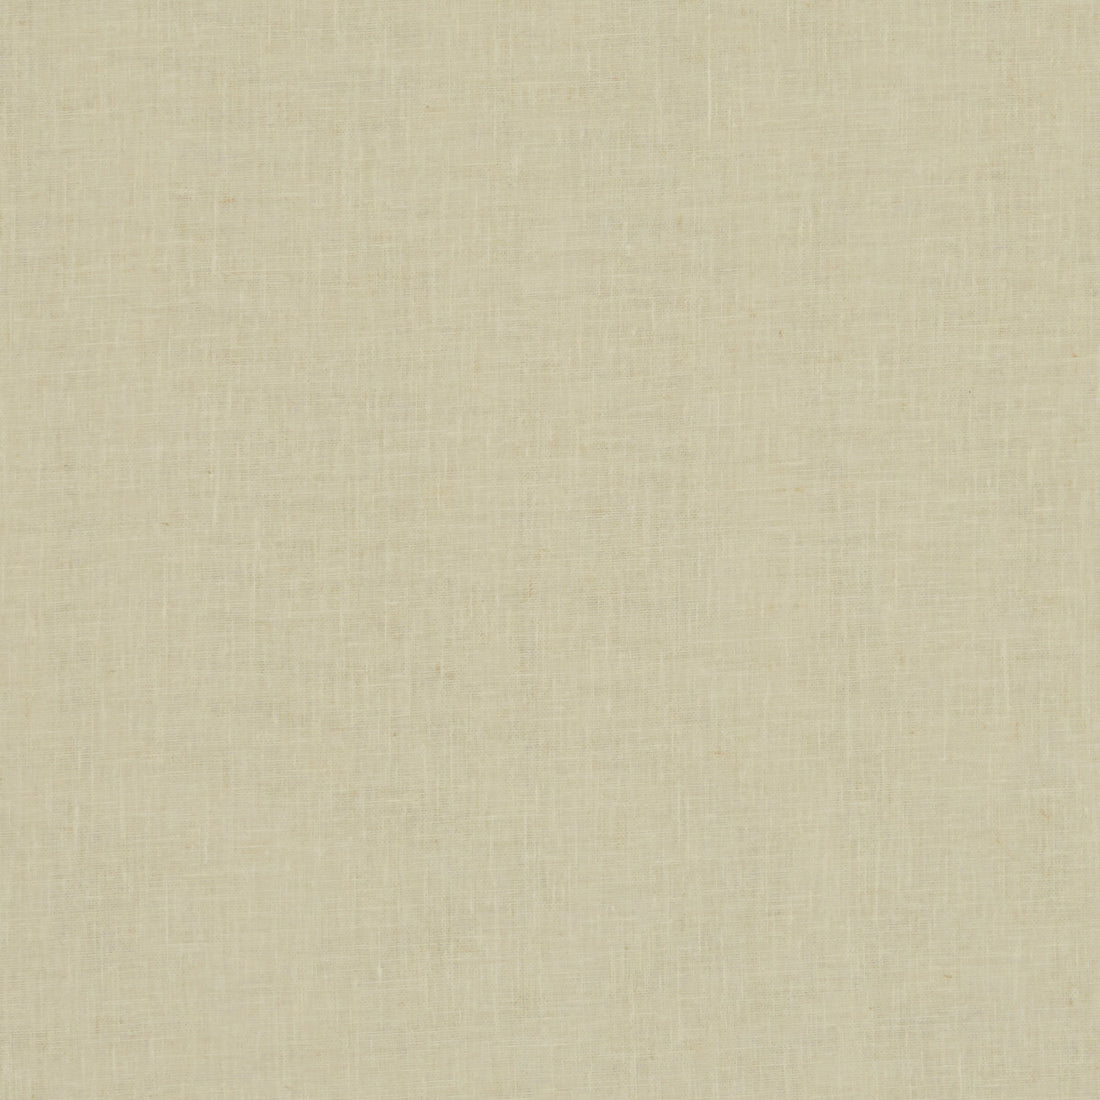 Midori fabric in bamboo color - pattern F1068/03.CAC.0 - by Clarke And Clarke in the Clarke &amp; Clarke Midori collection